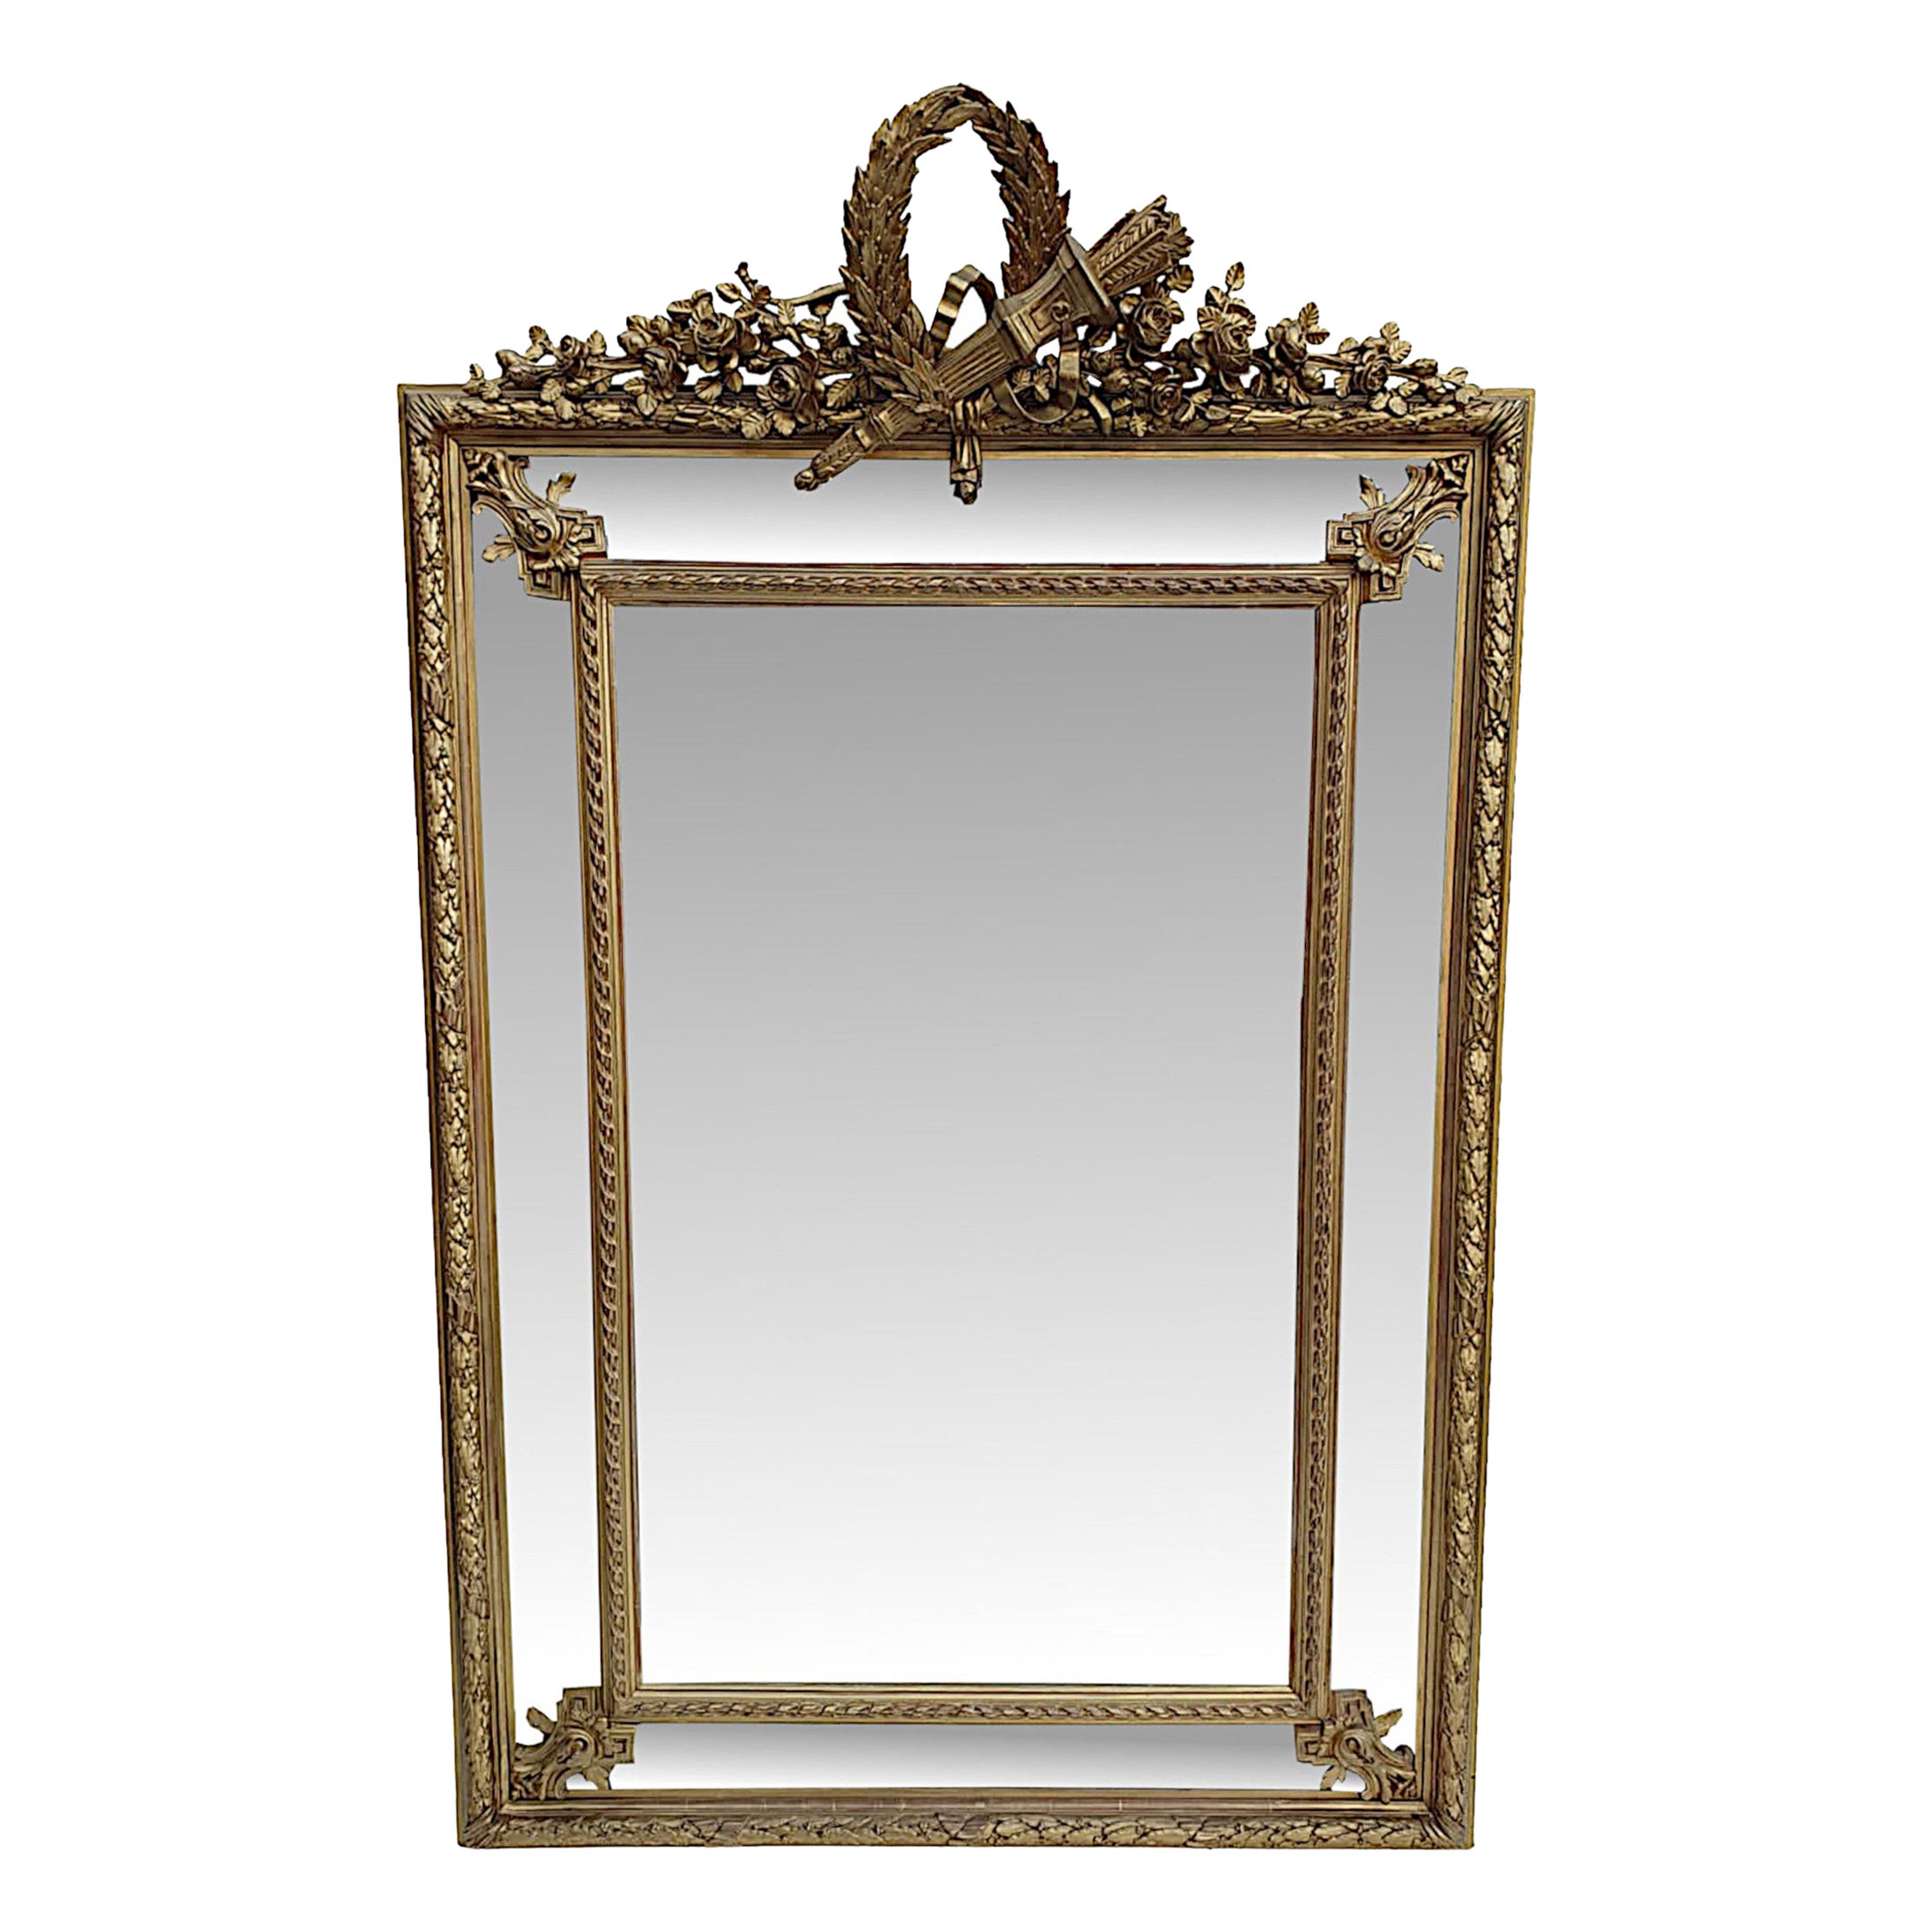 Superb 19th Century Giltwood Margin Overmantle or Hall Mirror